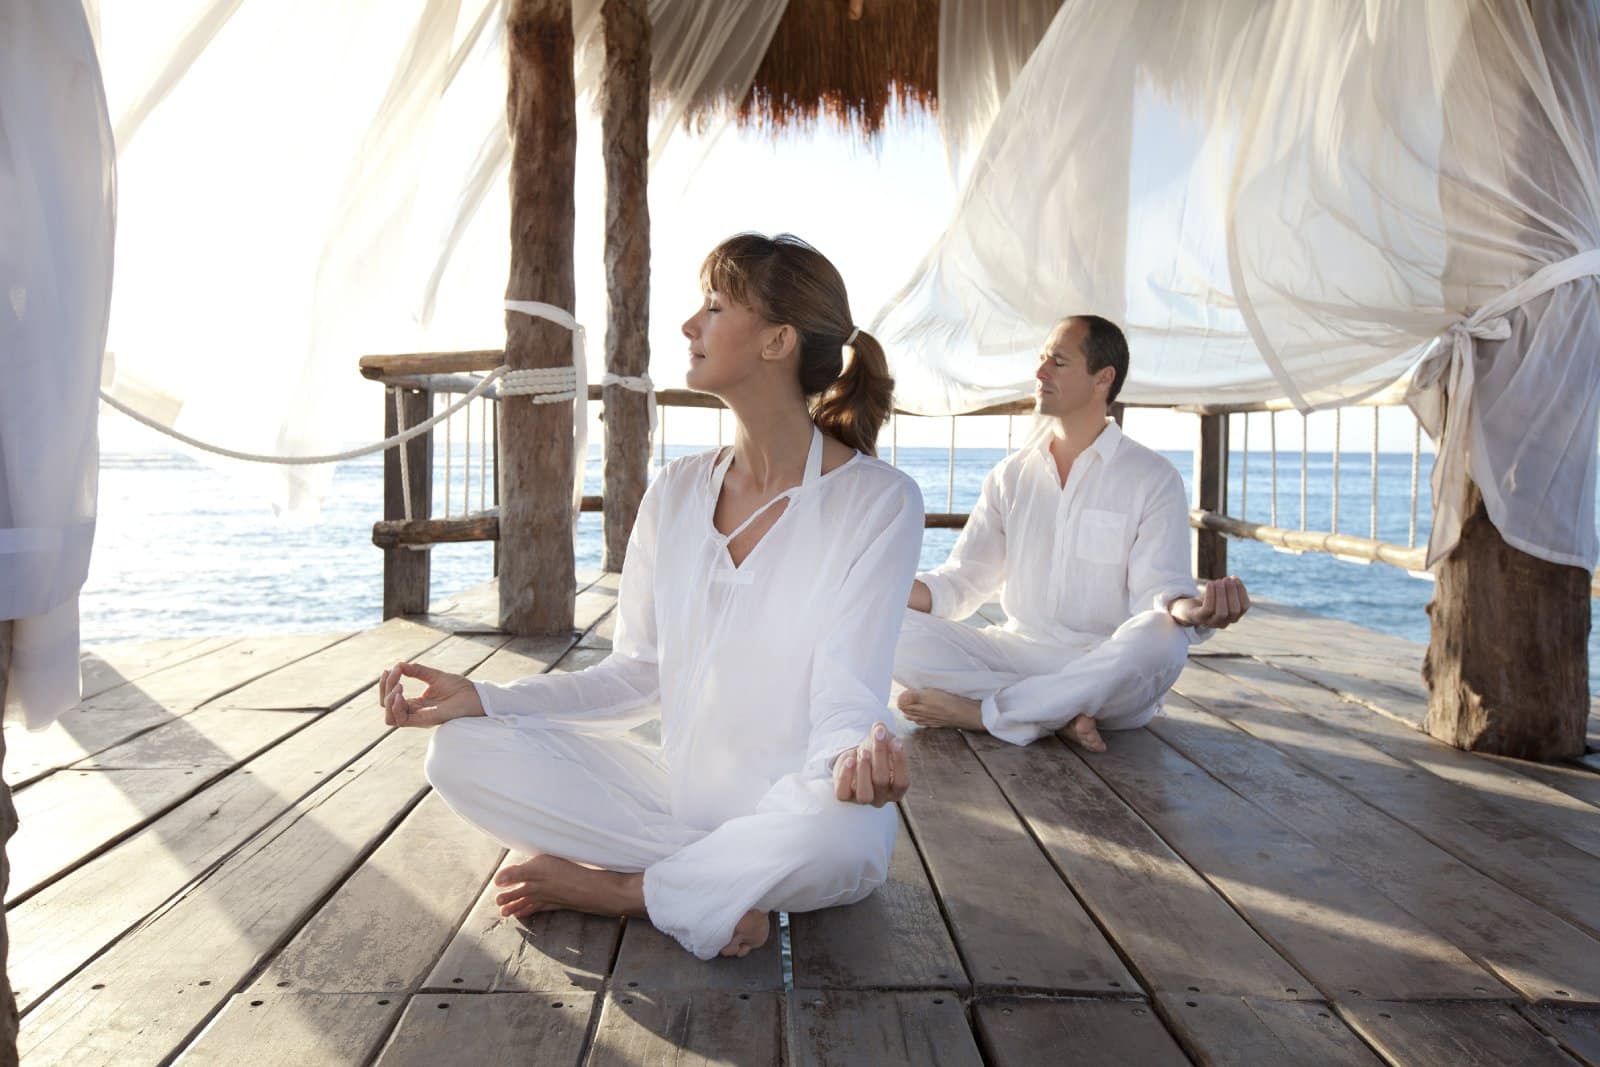 <p class="wp-caption-text">Image Credit: Shutterstock / plprod</p>  <p><span>SwaSwara is an Ayurvedic retreat and a journey towards self-discovery and holistic well-being. Located on the pristine Om Beach, the retreat offers a sanctuary where guests can explore the depths of their physical, mental, and spiritual health. SwaSwara’s wellness philosophy is rooted in Ayurveda, yoga, and meditation principles, supported by an environment that encourages a connection with nature.</span></p> <p><span>The retreat’s programs are designed to detoxify, heal, and rejuvenate, focusing on organic cuisine, art, and music workshops that enrich the wellness experience. The minimalist yet comfortable accommodations ensure a rejuvenating and environmentally conscious stay.</span></p> <p><b>Insider’s Tip: </b><span>Participate in the art and music therapy sessions offered by SwaSwara. These creative workshops are designed to unlock emotional blockages and promote self-expression, enhancing healing.</span></p> <p><b>When to Travel: </b><span>The ideal time for a retreat at SwaSwara is from November to March, when the weather is cooler and drier, making it ideal for enjoying the beach and outdoor activities.</span></p> <p><b>How to Get There: </b><span>The nearest airport is Dabolim Airport in Goa, about 150 kilometers away. Gokarna is also reachable by train, with Gokarna Road railway station located approximately 10 kilometers from the retreat.</span></p>